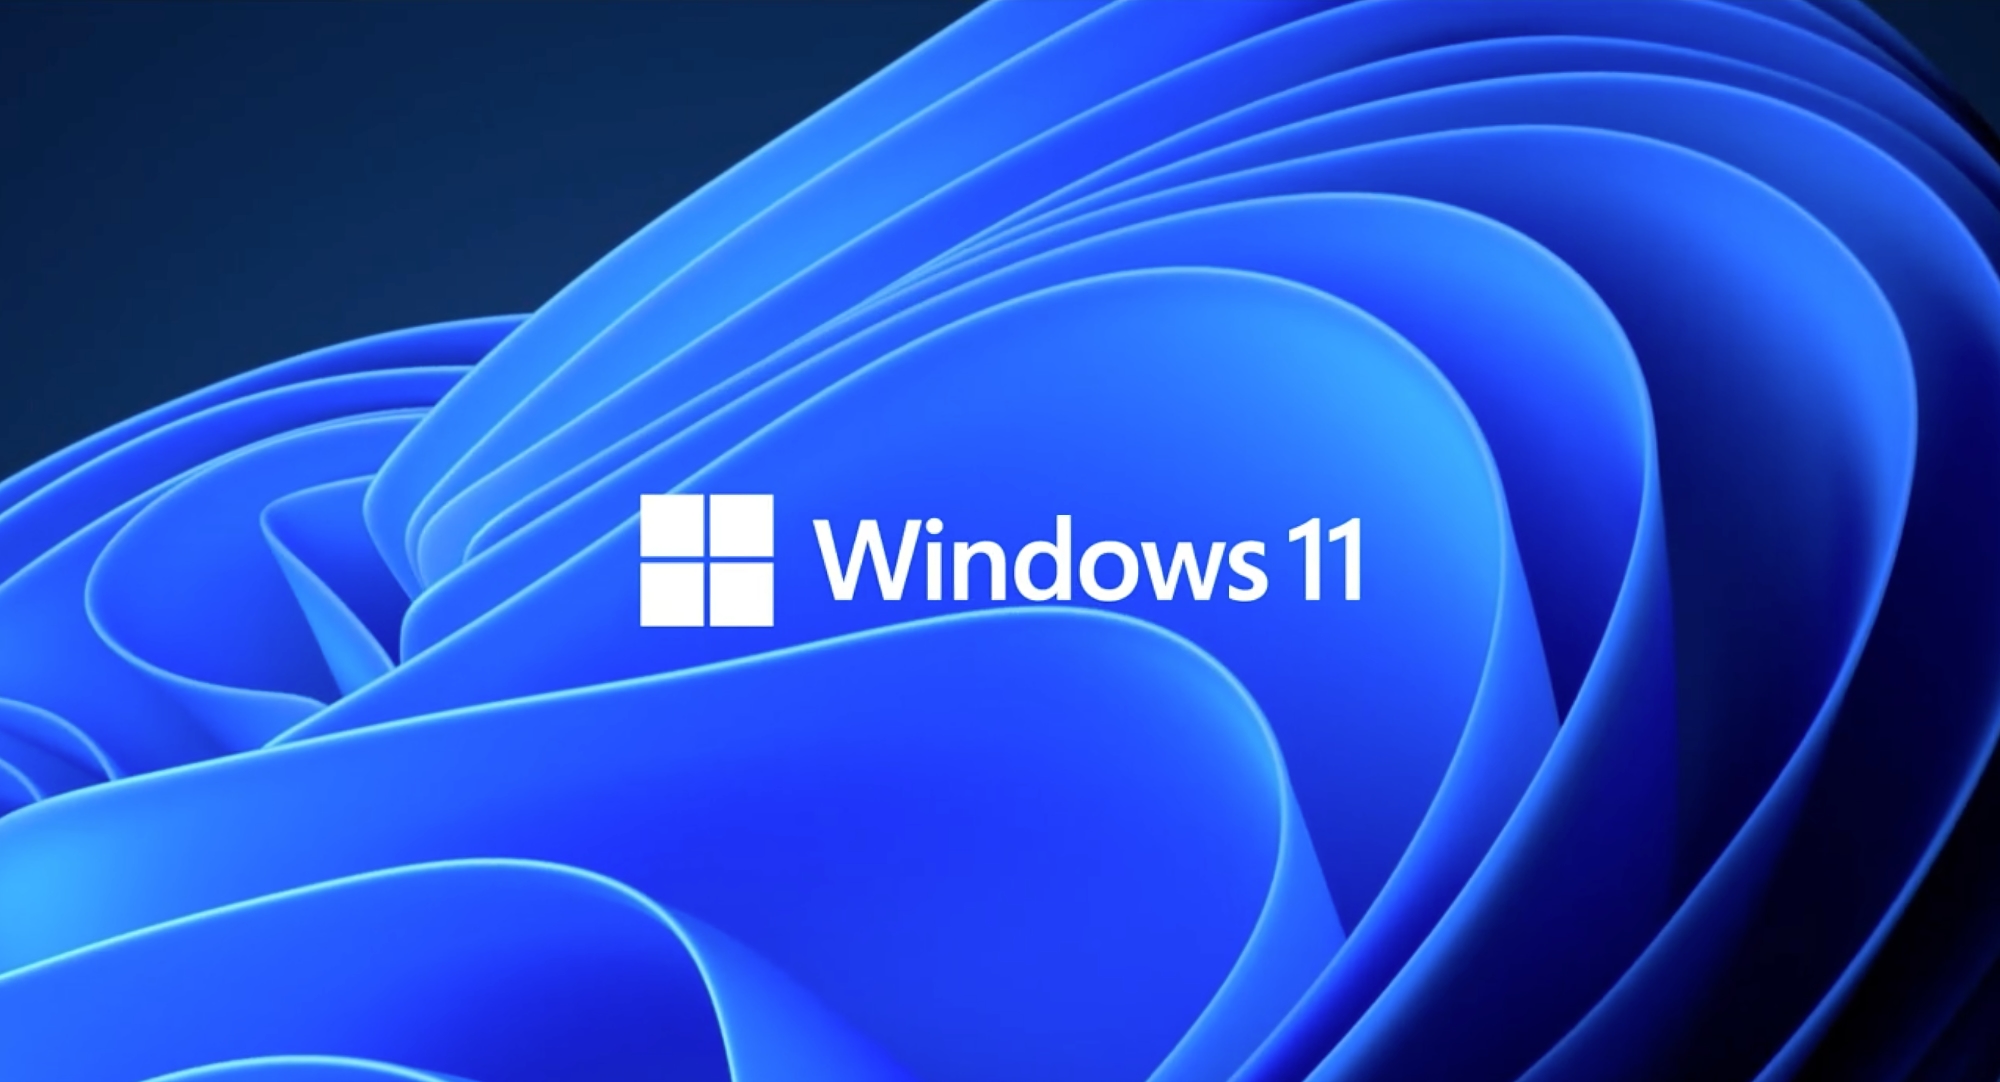 What we've been (not) waiting for for 6 years: Microsoft officially unveils Windows 11